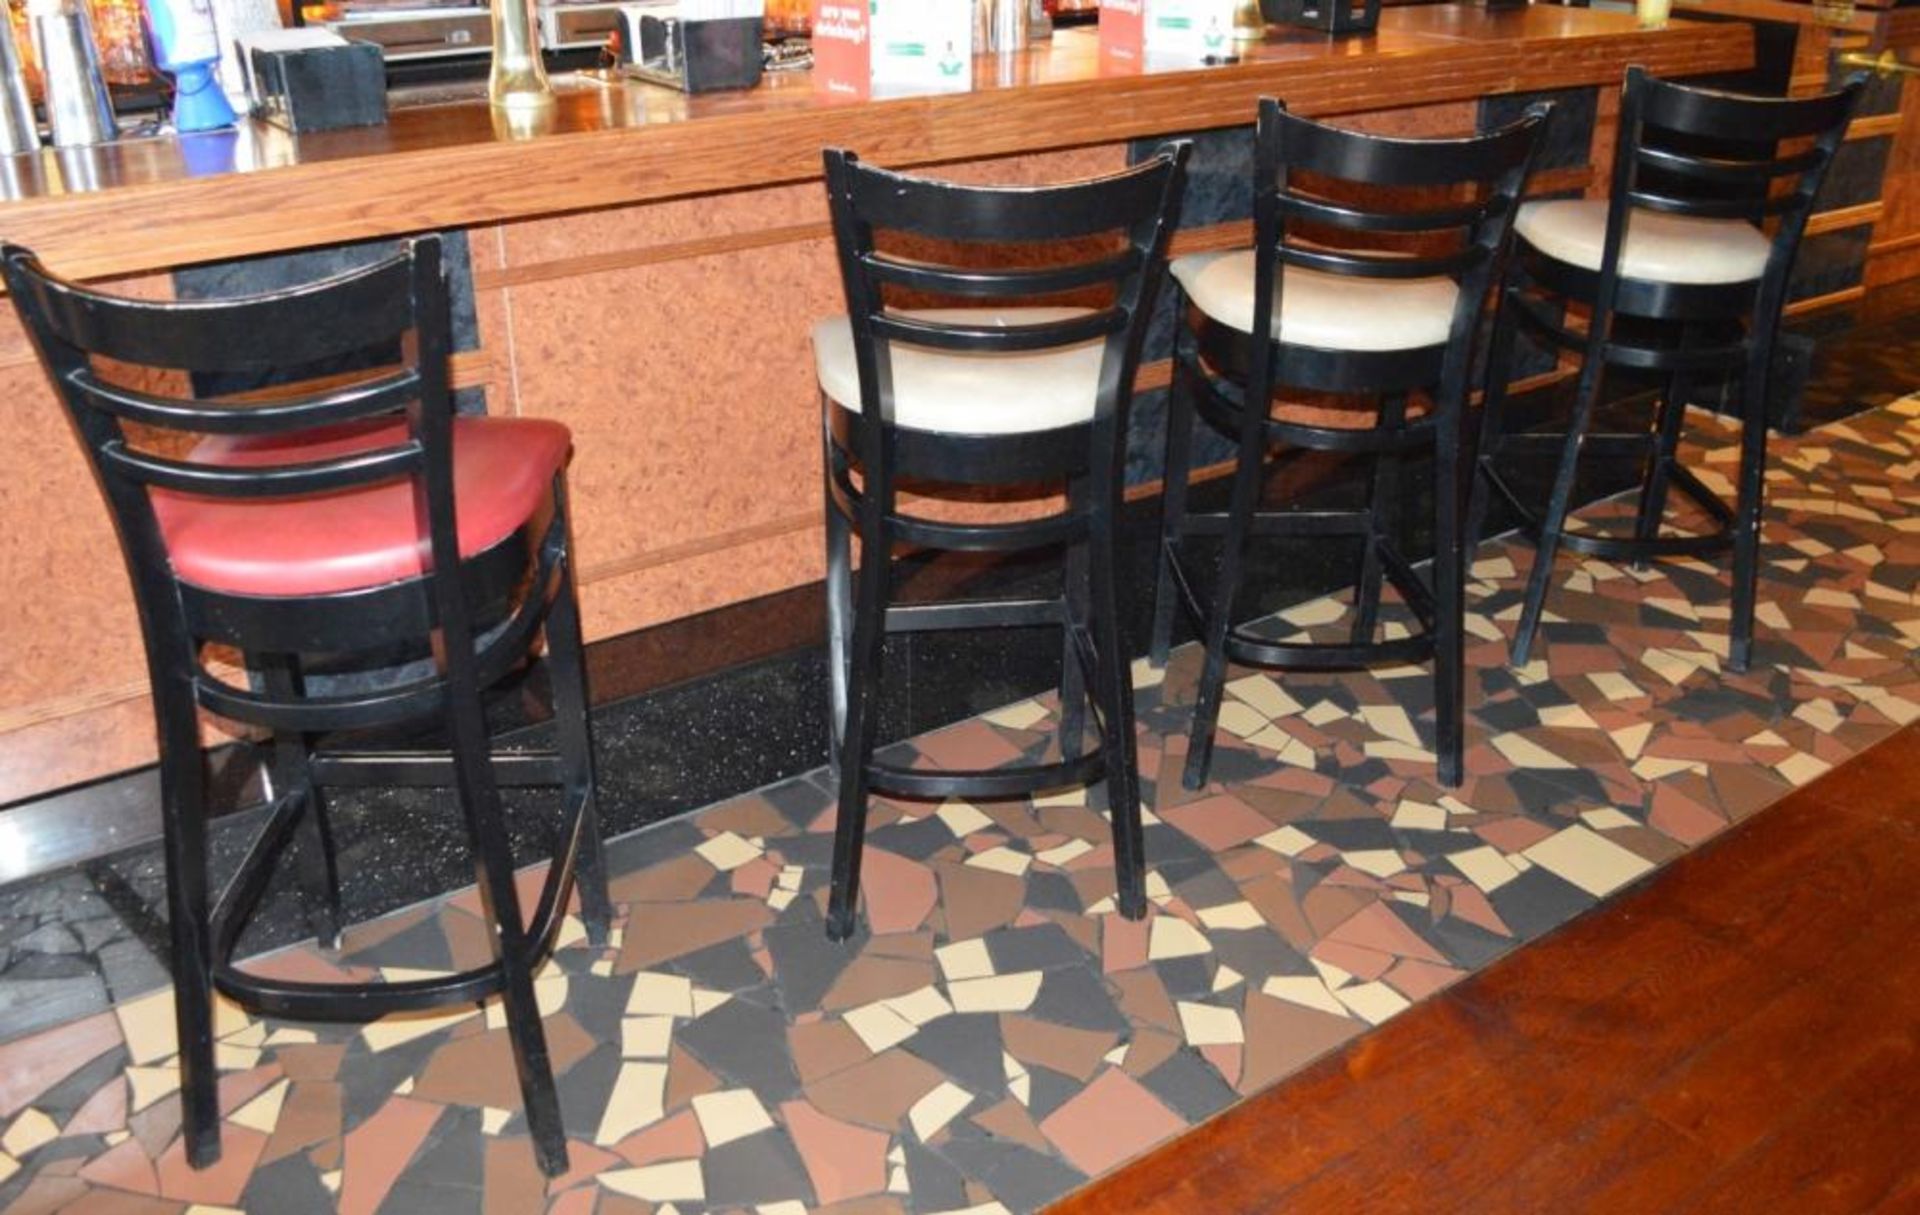 8 x Ladderback Bar Stools in Black and Cream and Red Faux Leather Seat Pads - CL357 - Location: Bolt - Image 6 of 9